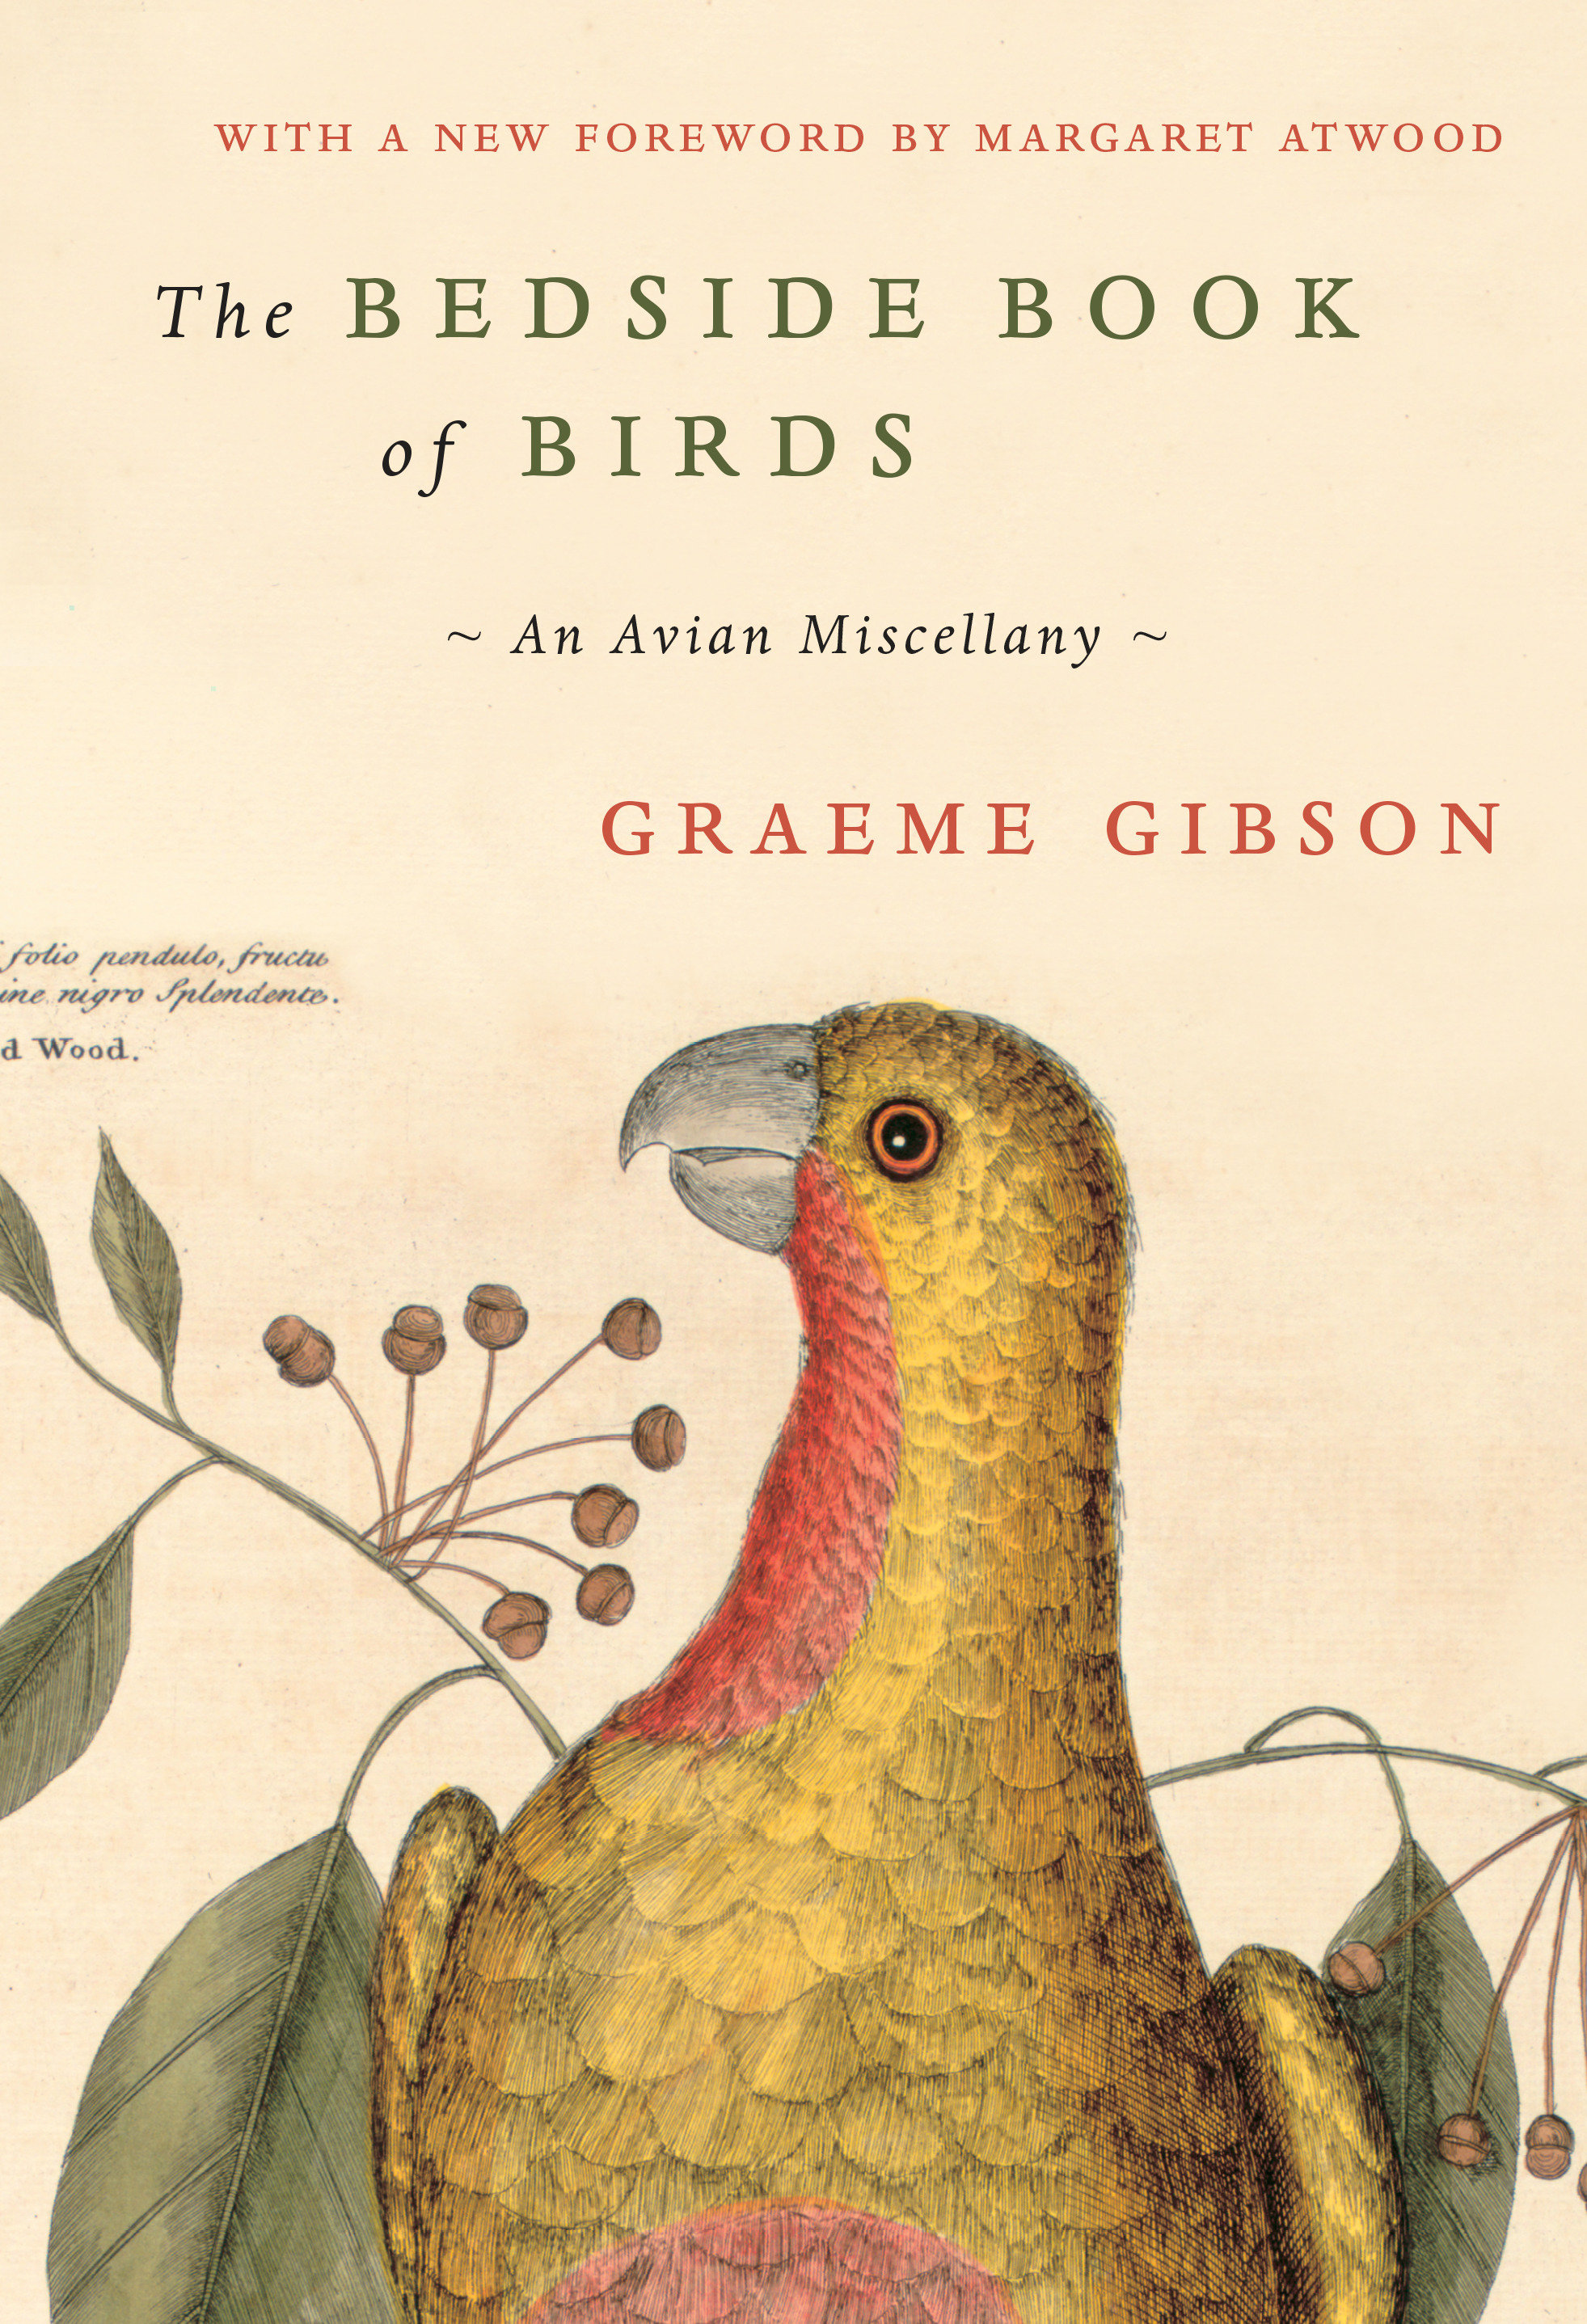 The Bedside Book of Birds: an Avian Miscellany By Graeme Gibson